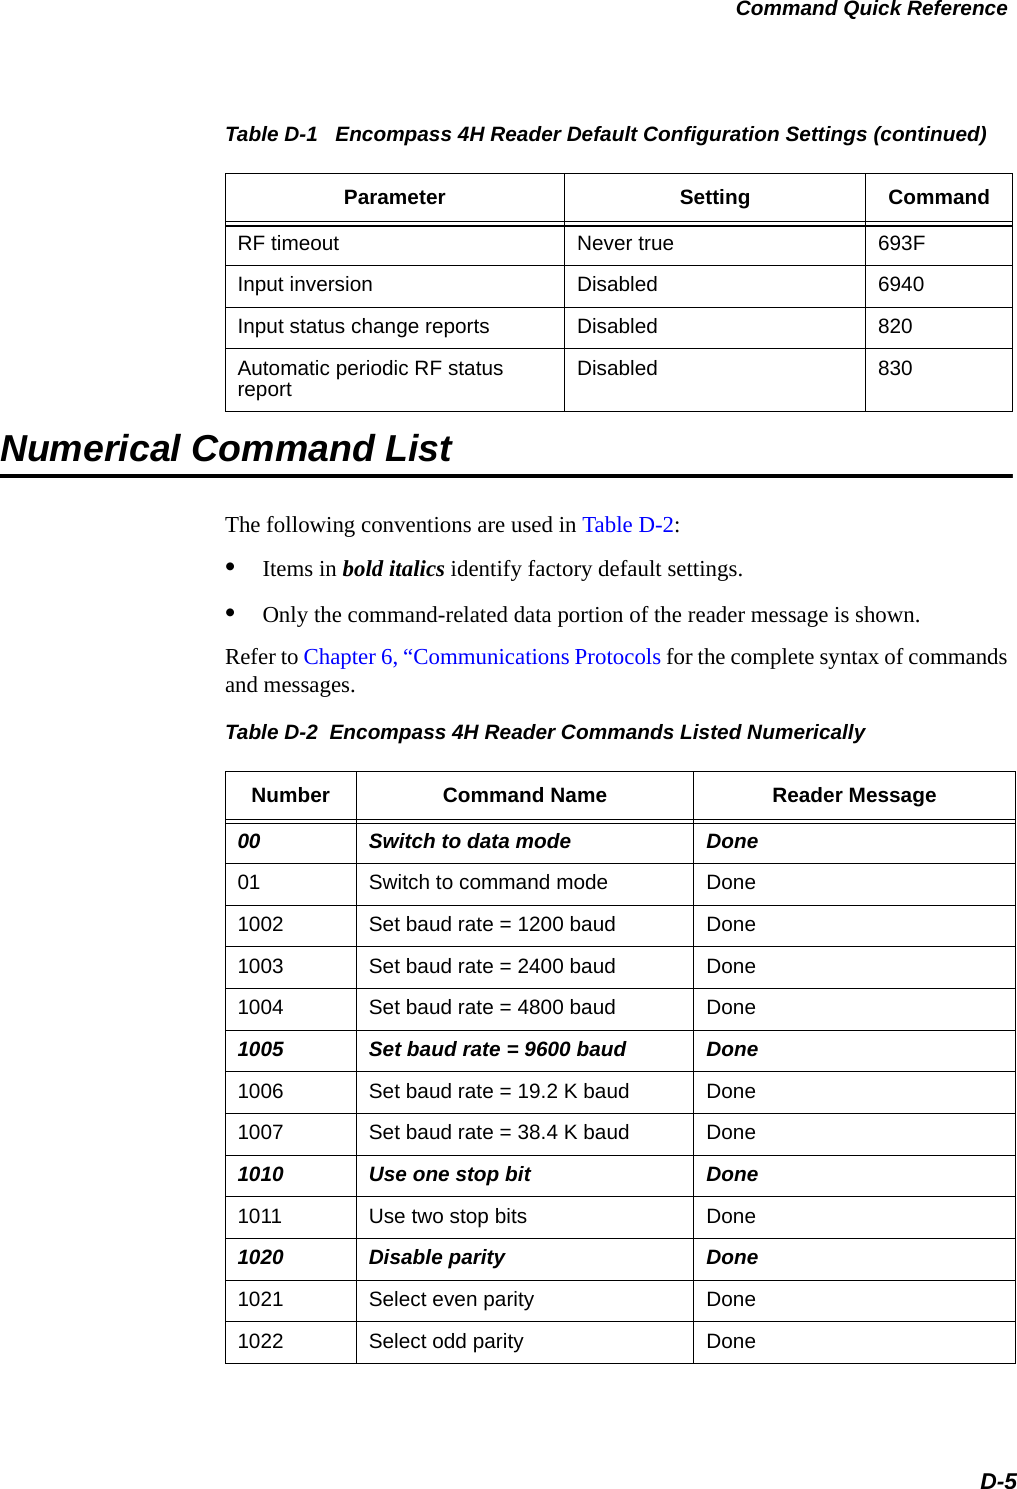 Command Quick ReferenceD-5Numerical Command ListThe following conventions are used in Table D-2: •Items in bold italics identify factory default settings.•Only the command-related data portion of the reader message is shown.Refer to Chapter 6, “Communications Protocols for the complete syntax of commands and messages. RF timeout Never true 693FInput inversion Disabled 6940Input status change reports Disabled 820Automatic periodic RF status report Disabled 830Table D-1   Encompass 4H Reader Default Configuration Settings (continued)Parameter Setting CommandTable D-2  Encompass 4H Reader Commands Listed Numerically Number Command Name Reader Message00 Switch to data mode Done01 Switch to command mode Done1002 Set baud rate = 1200 baud Done1003 Set baud rate = 2400 baud Done1004 Set baud rate = 4800 baud Done1005 Set baud rate = 9600 baud Done1006 Set baud rate = 19.2 K baud Done1007 Set baud rate = 38.4 K baud Done1010 Use one stop bit Done1011 Use two stop bits Done1020 Disable parity Done1021 Select even parity Done1022 Select odd parity Done